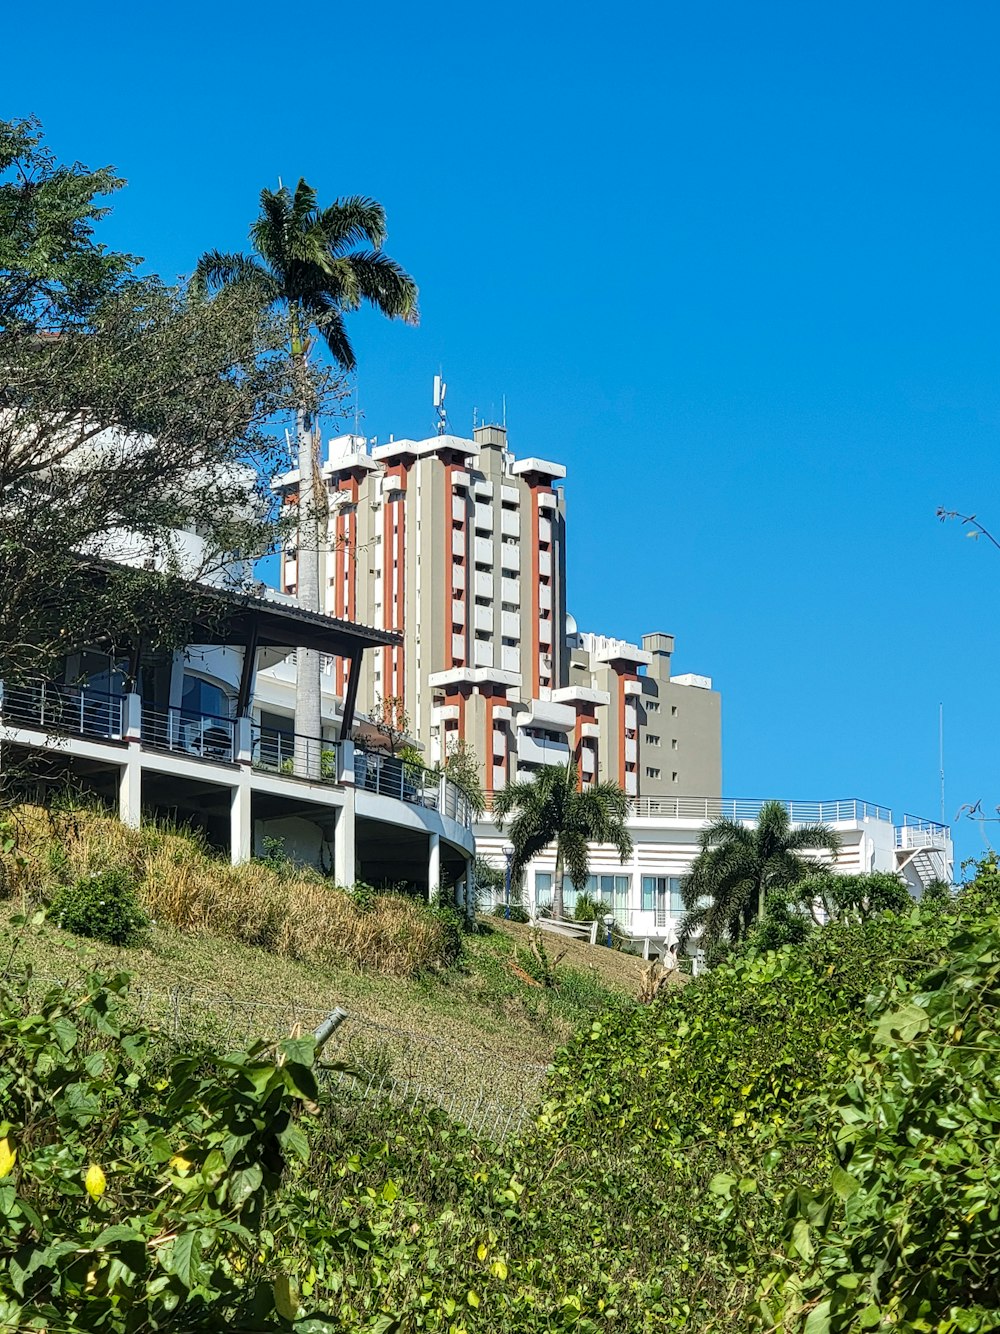 a building on a hill with trees in the foreground